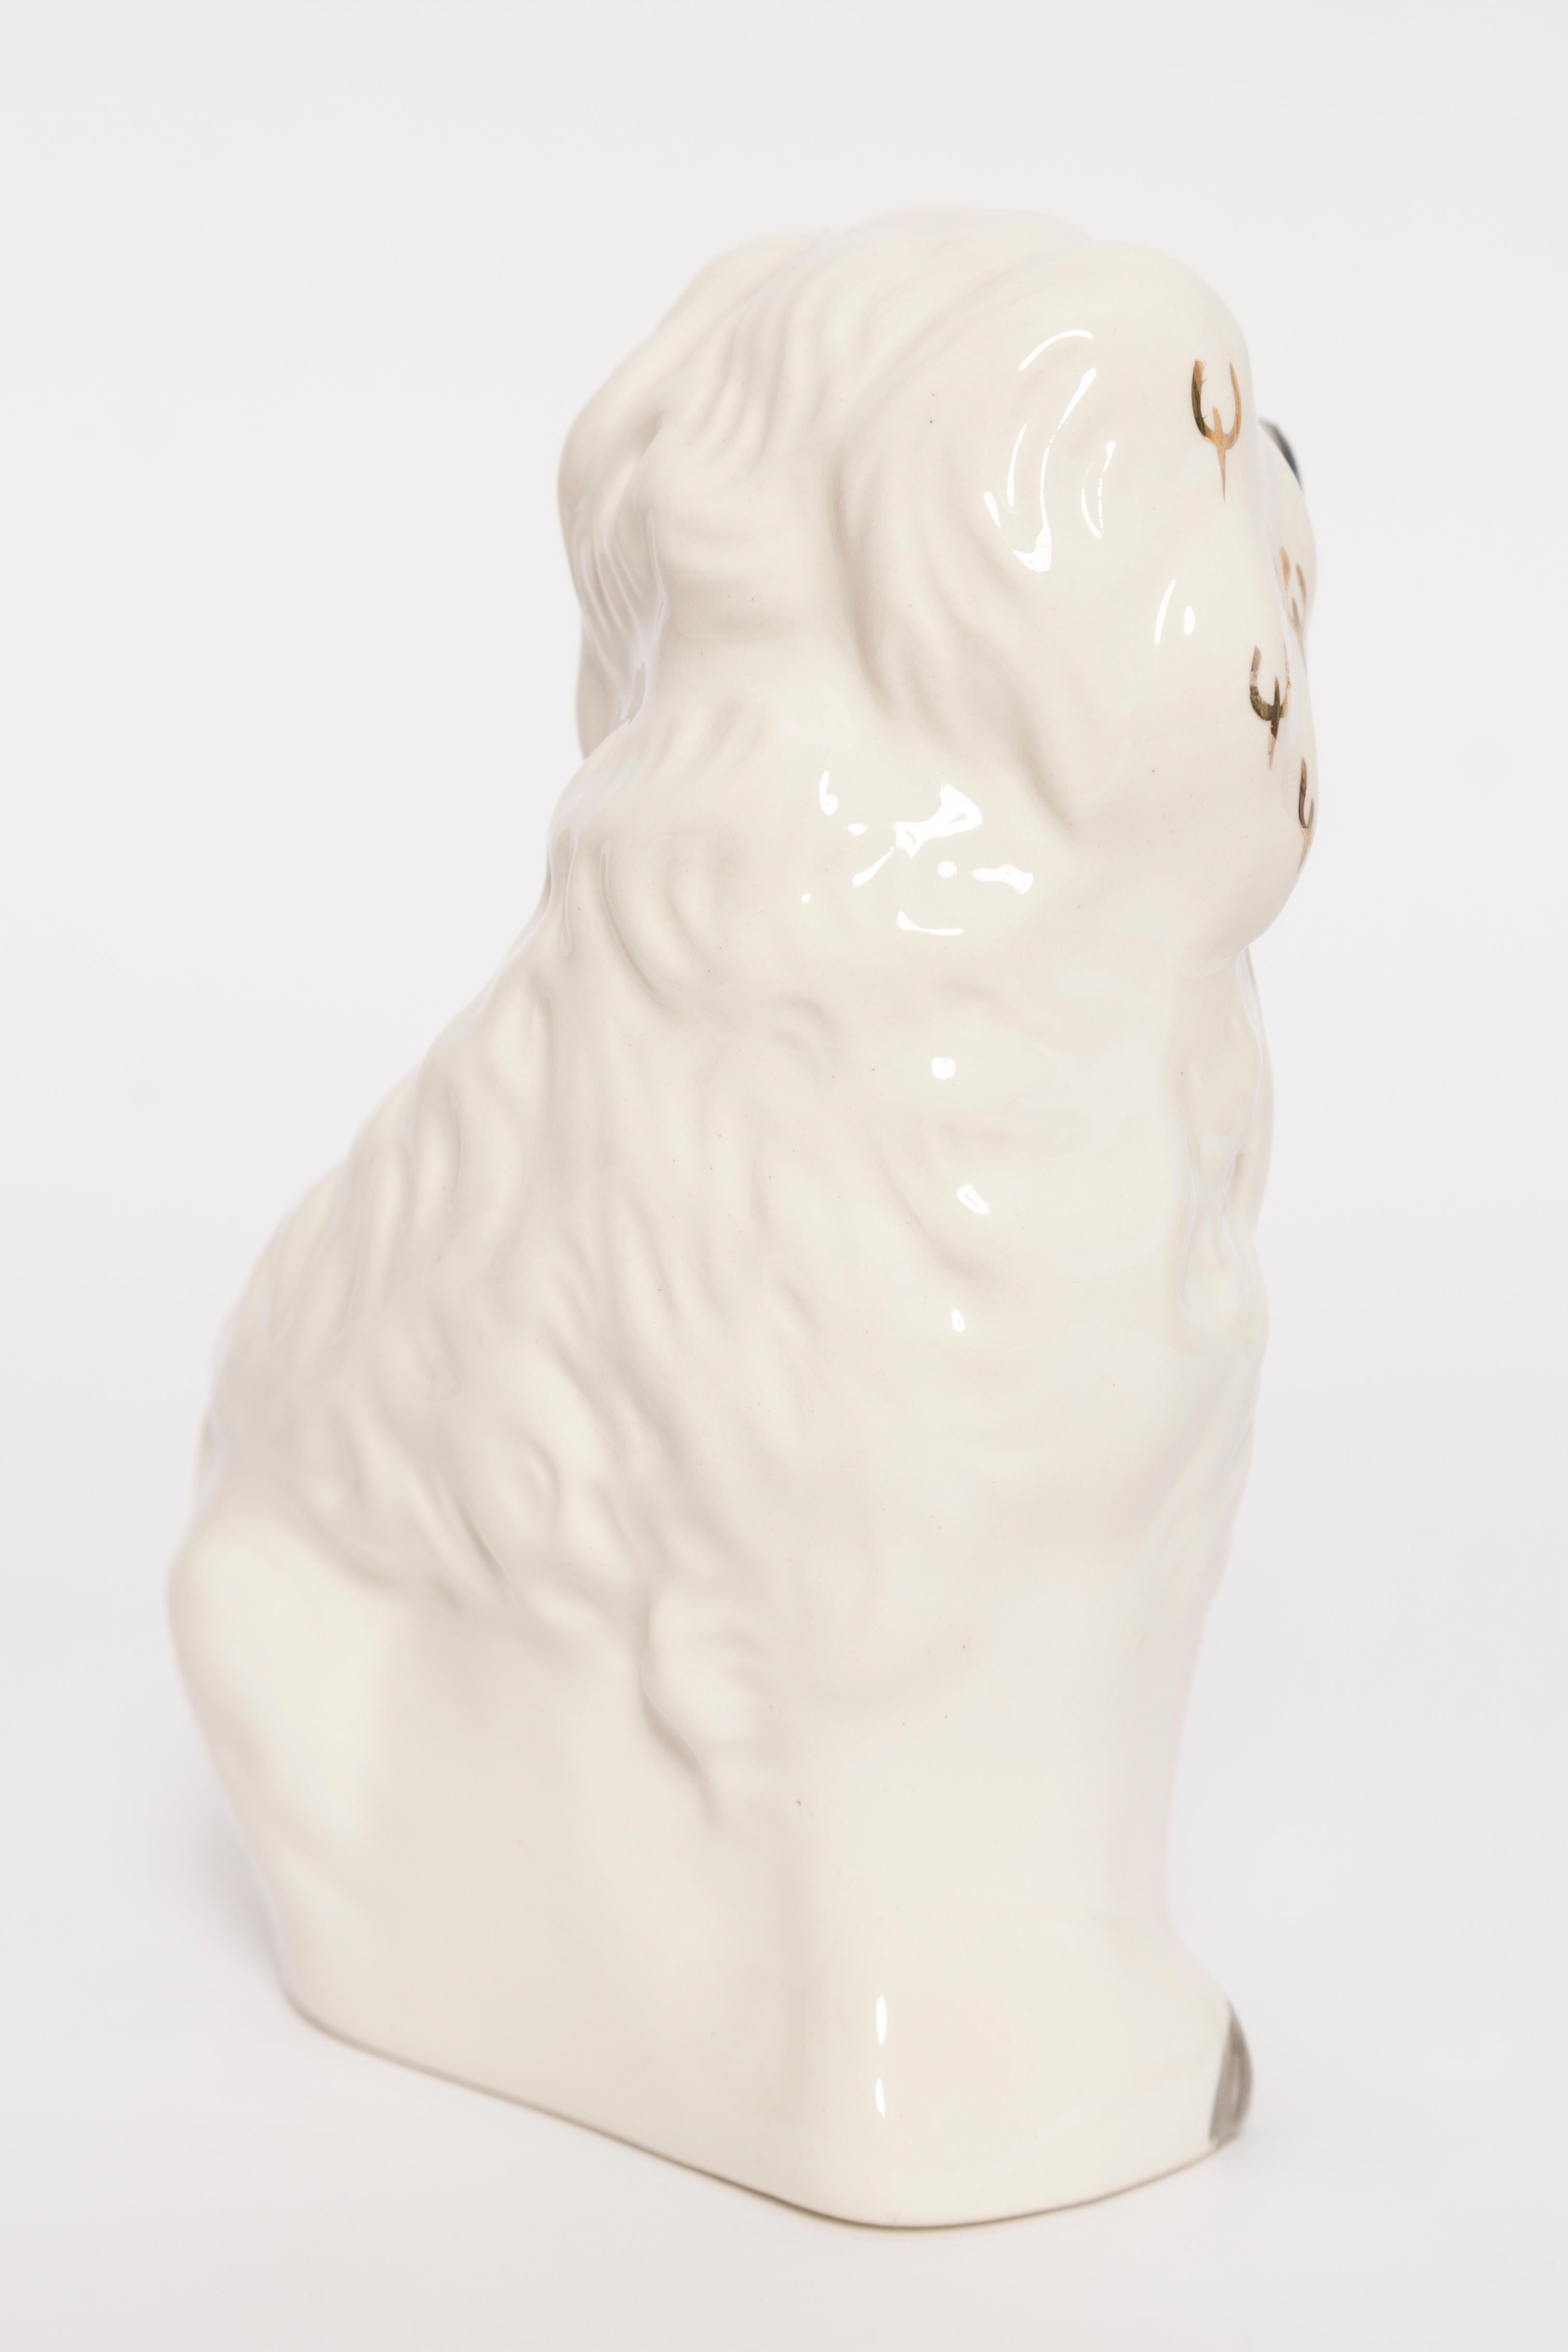 Ceramic 19th Century English Pottery Yorkshire Dog Sculpture Staffordshire England 1960s For Sale